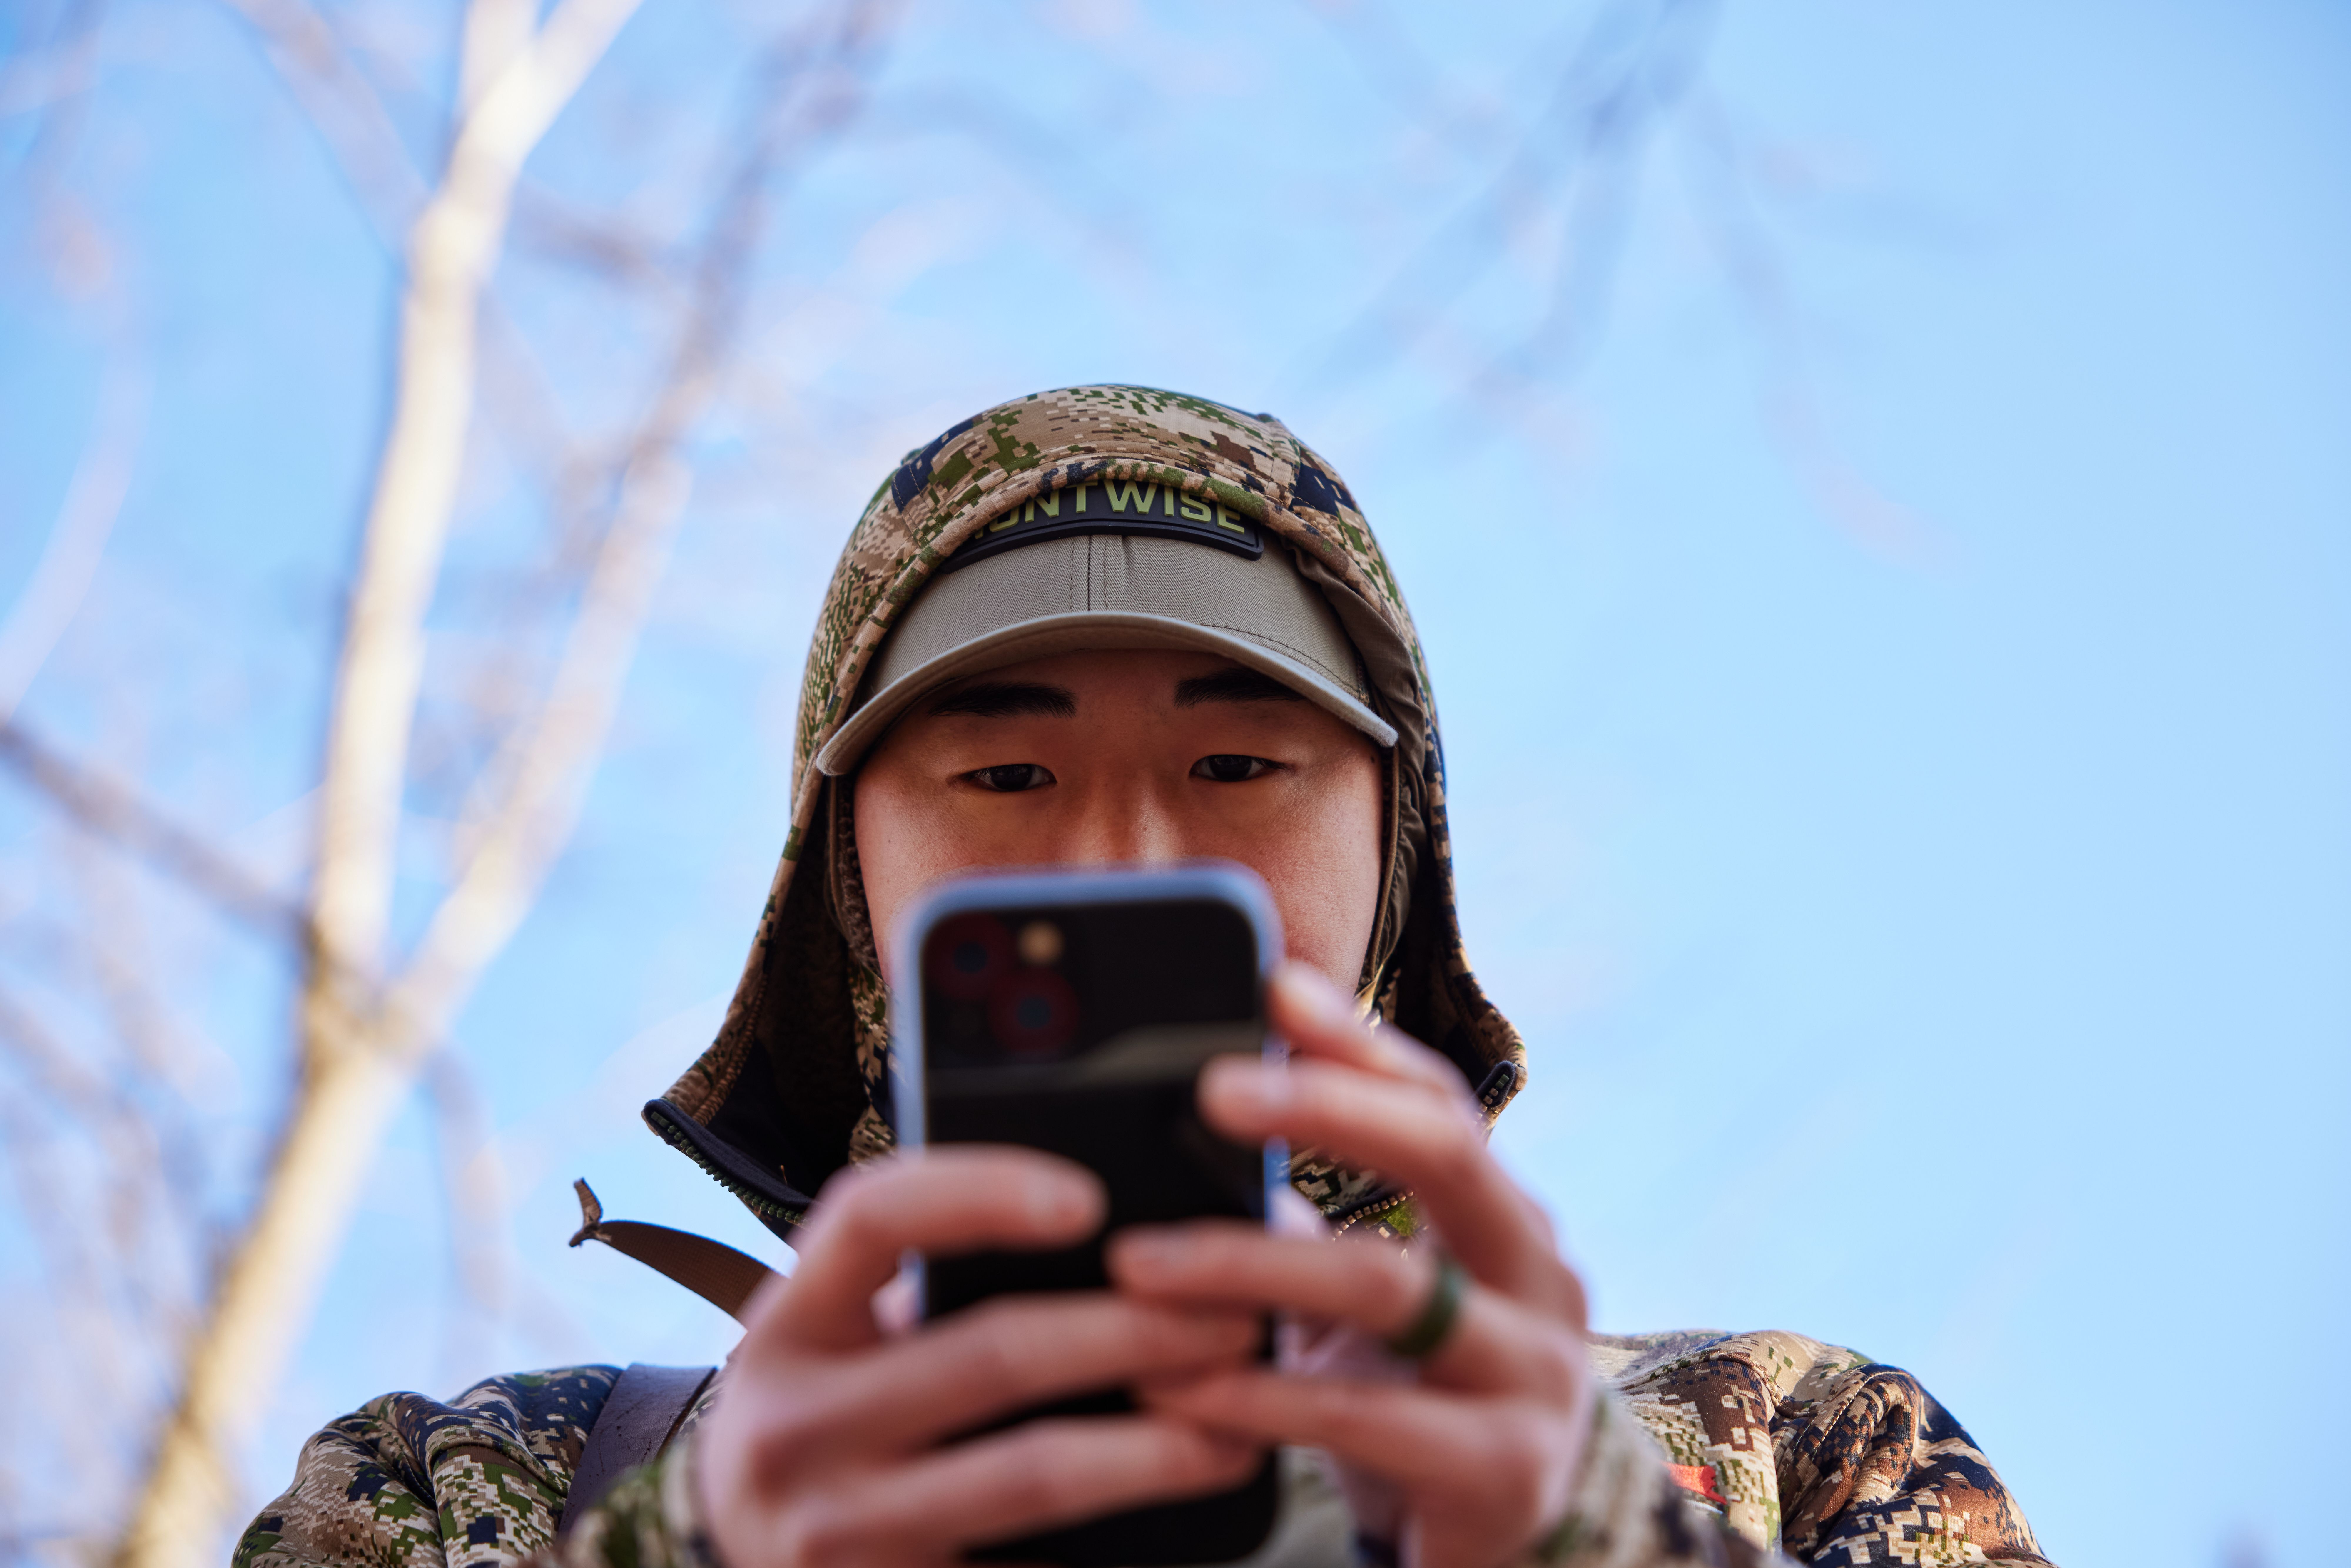 A hunter uses a phone, mark treestands in HuntWise concept. 